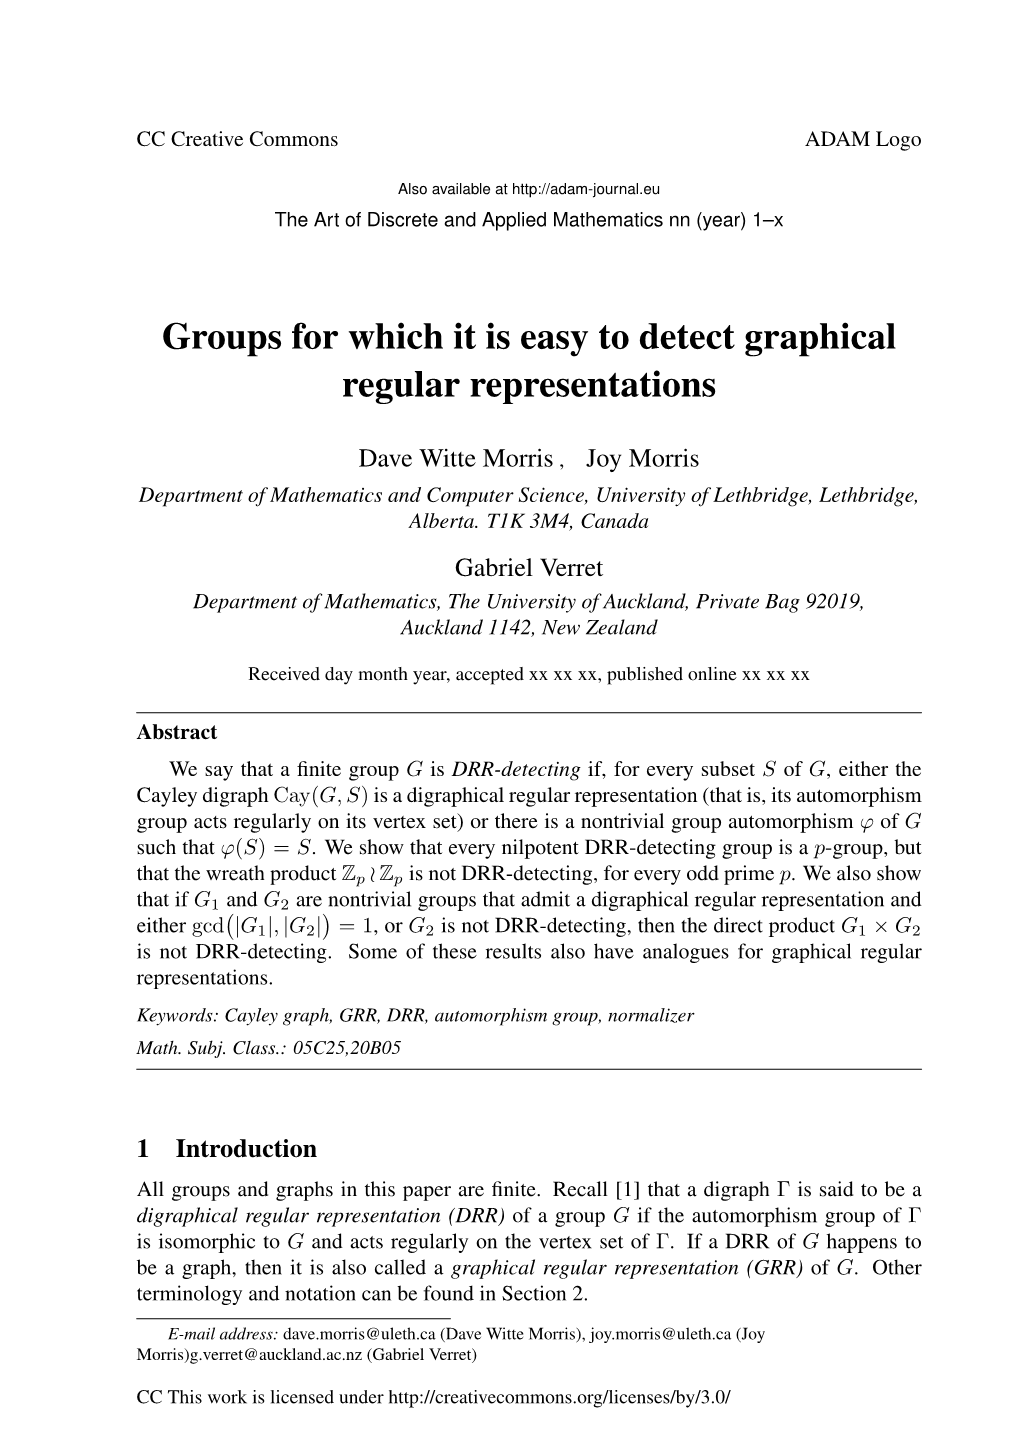 Groups for Which It Is Easy to Detect Graphical Regular Representations